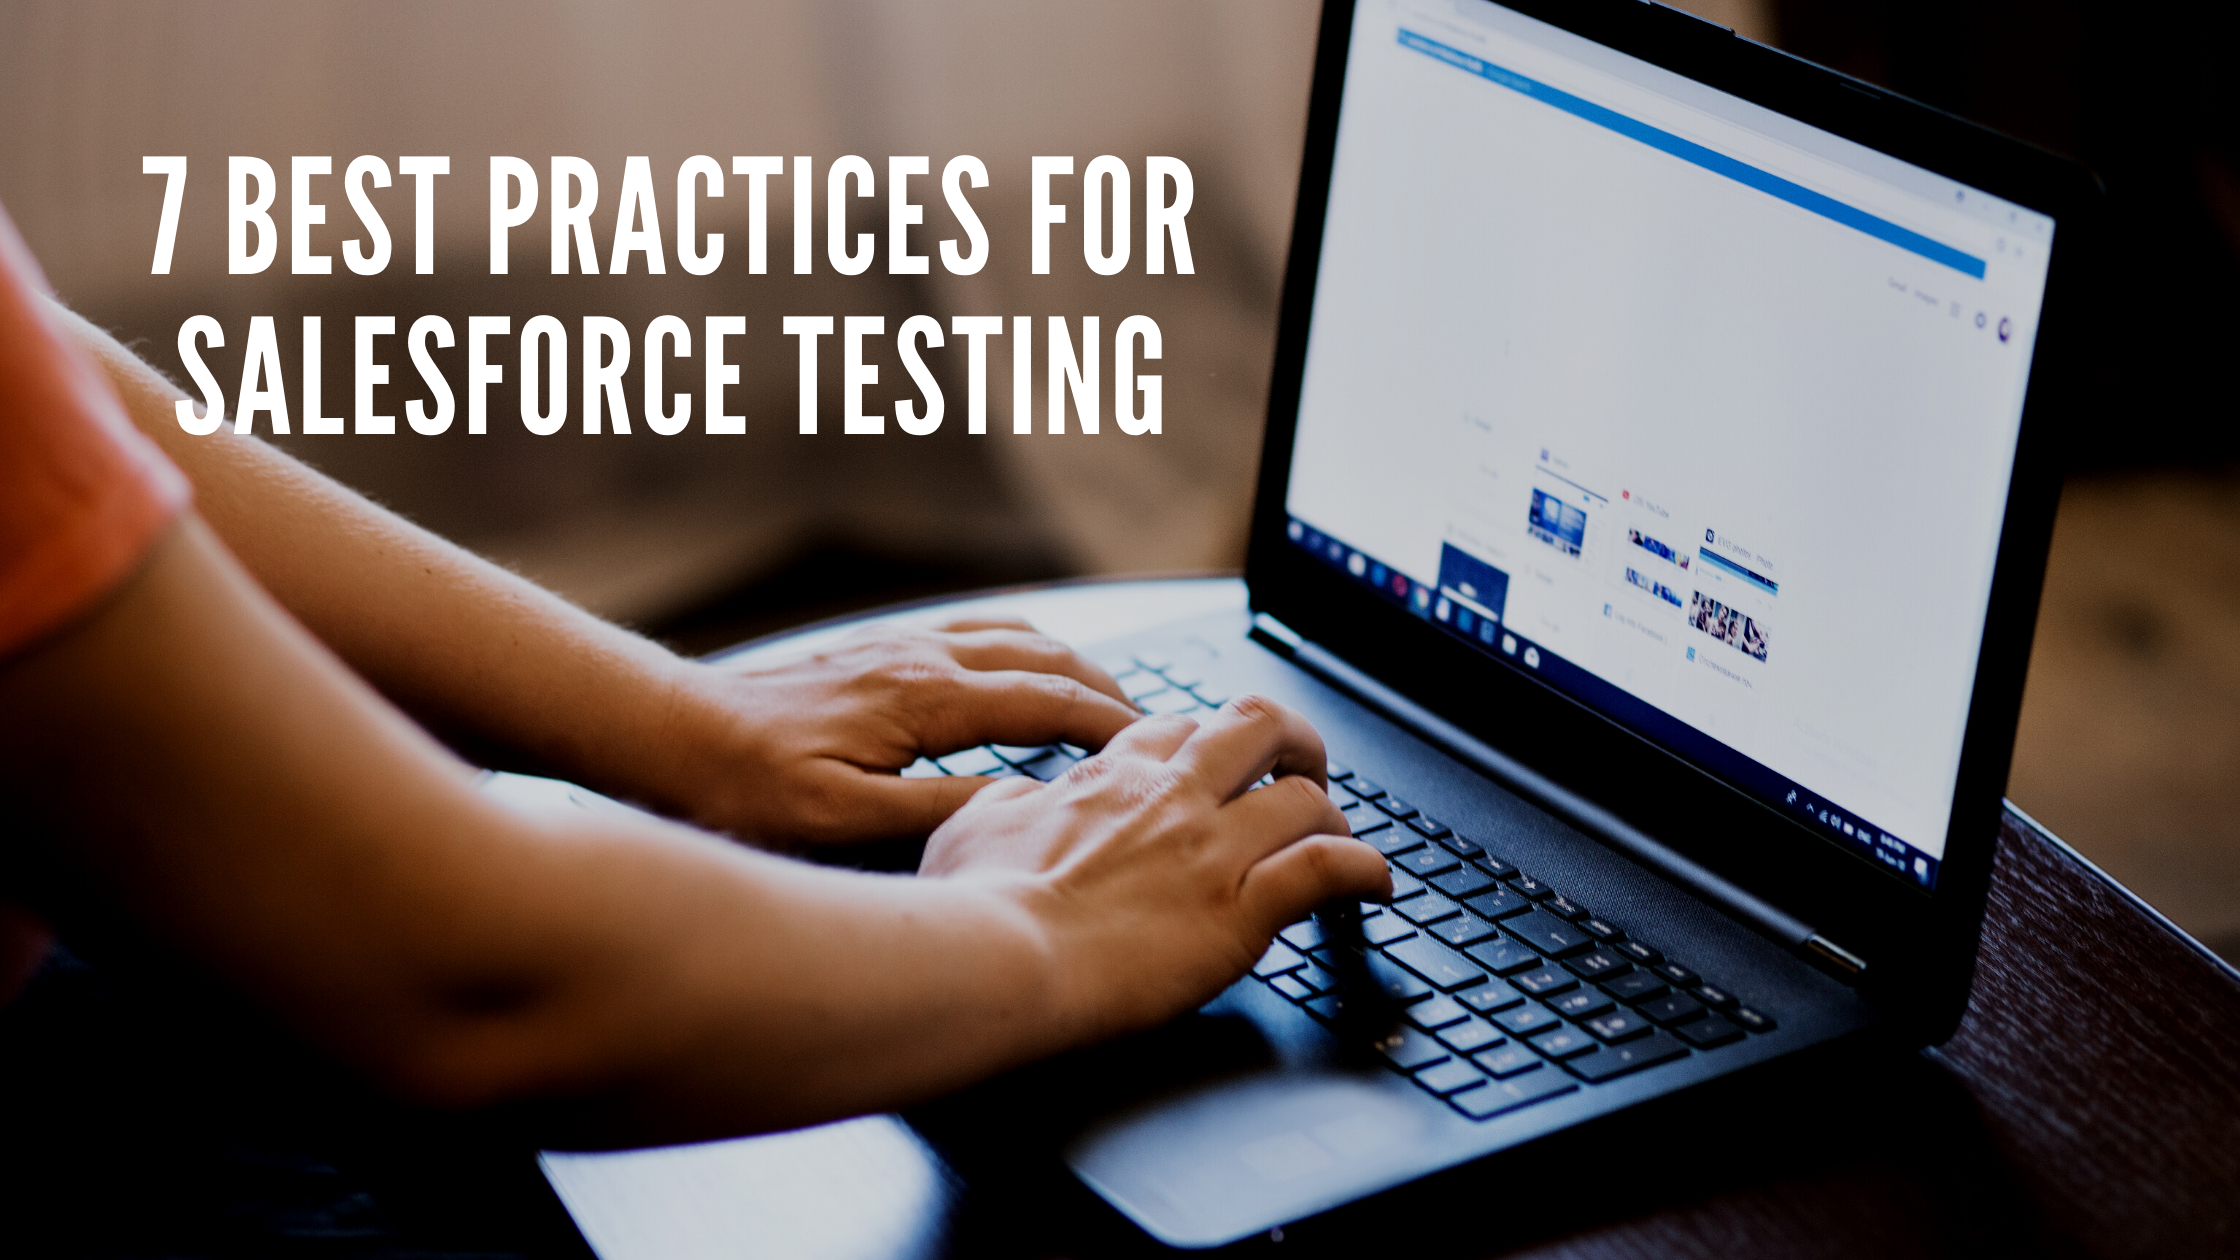 7 Best Practices for Salesforce Testing